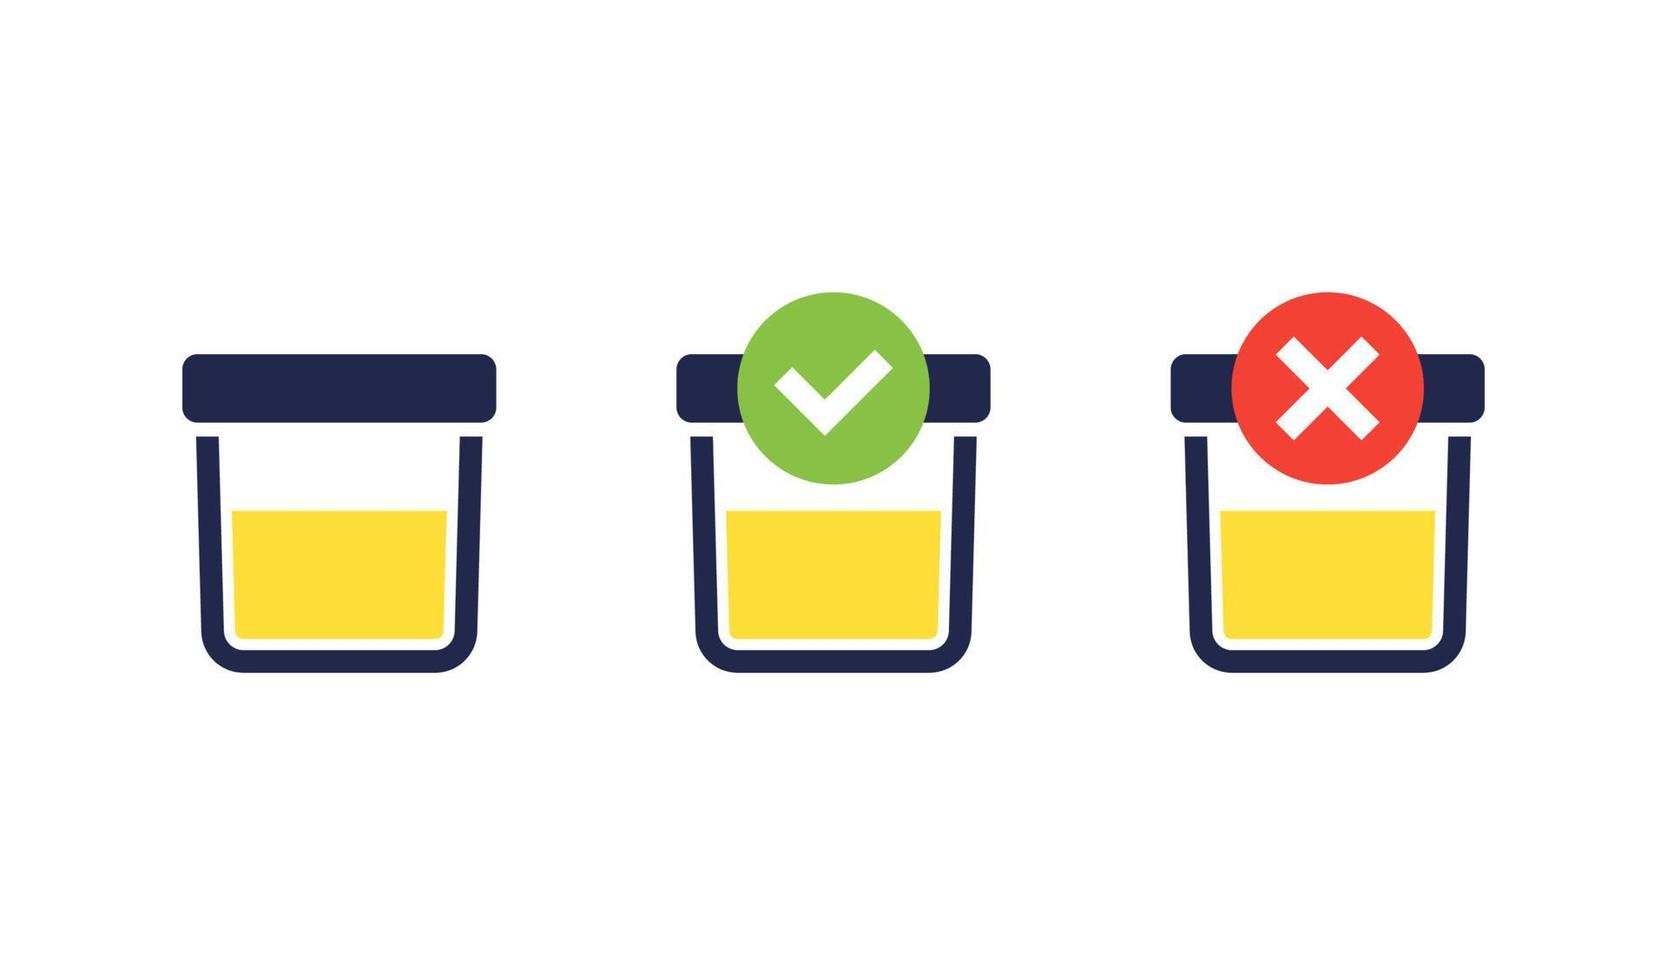 urine test, samples icons, vector